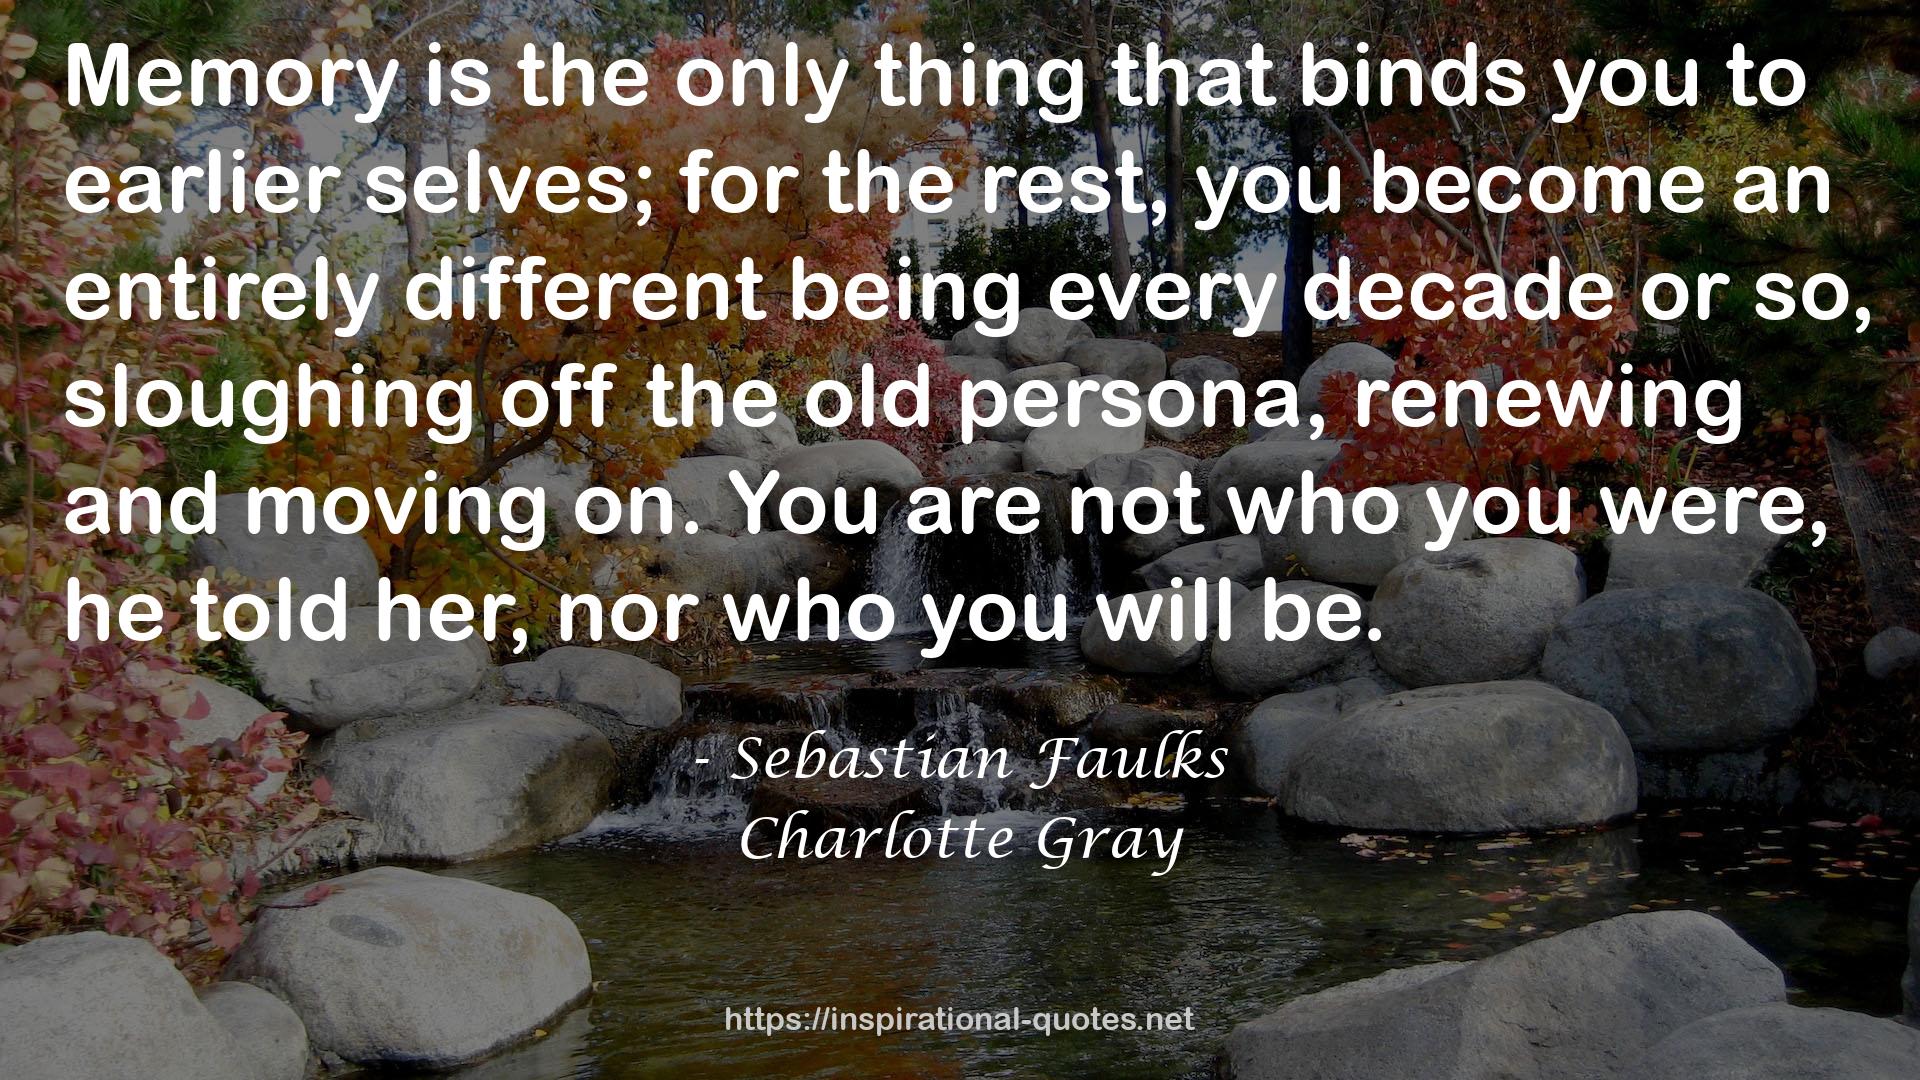 Charlotte Gray QUOTES